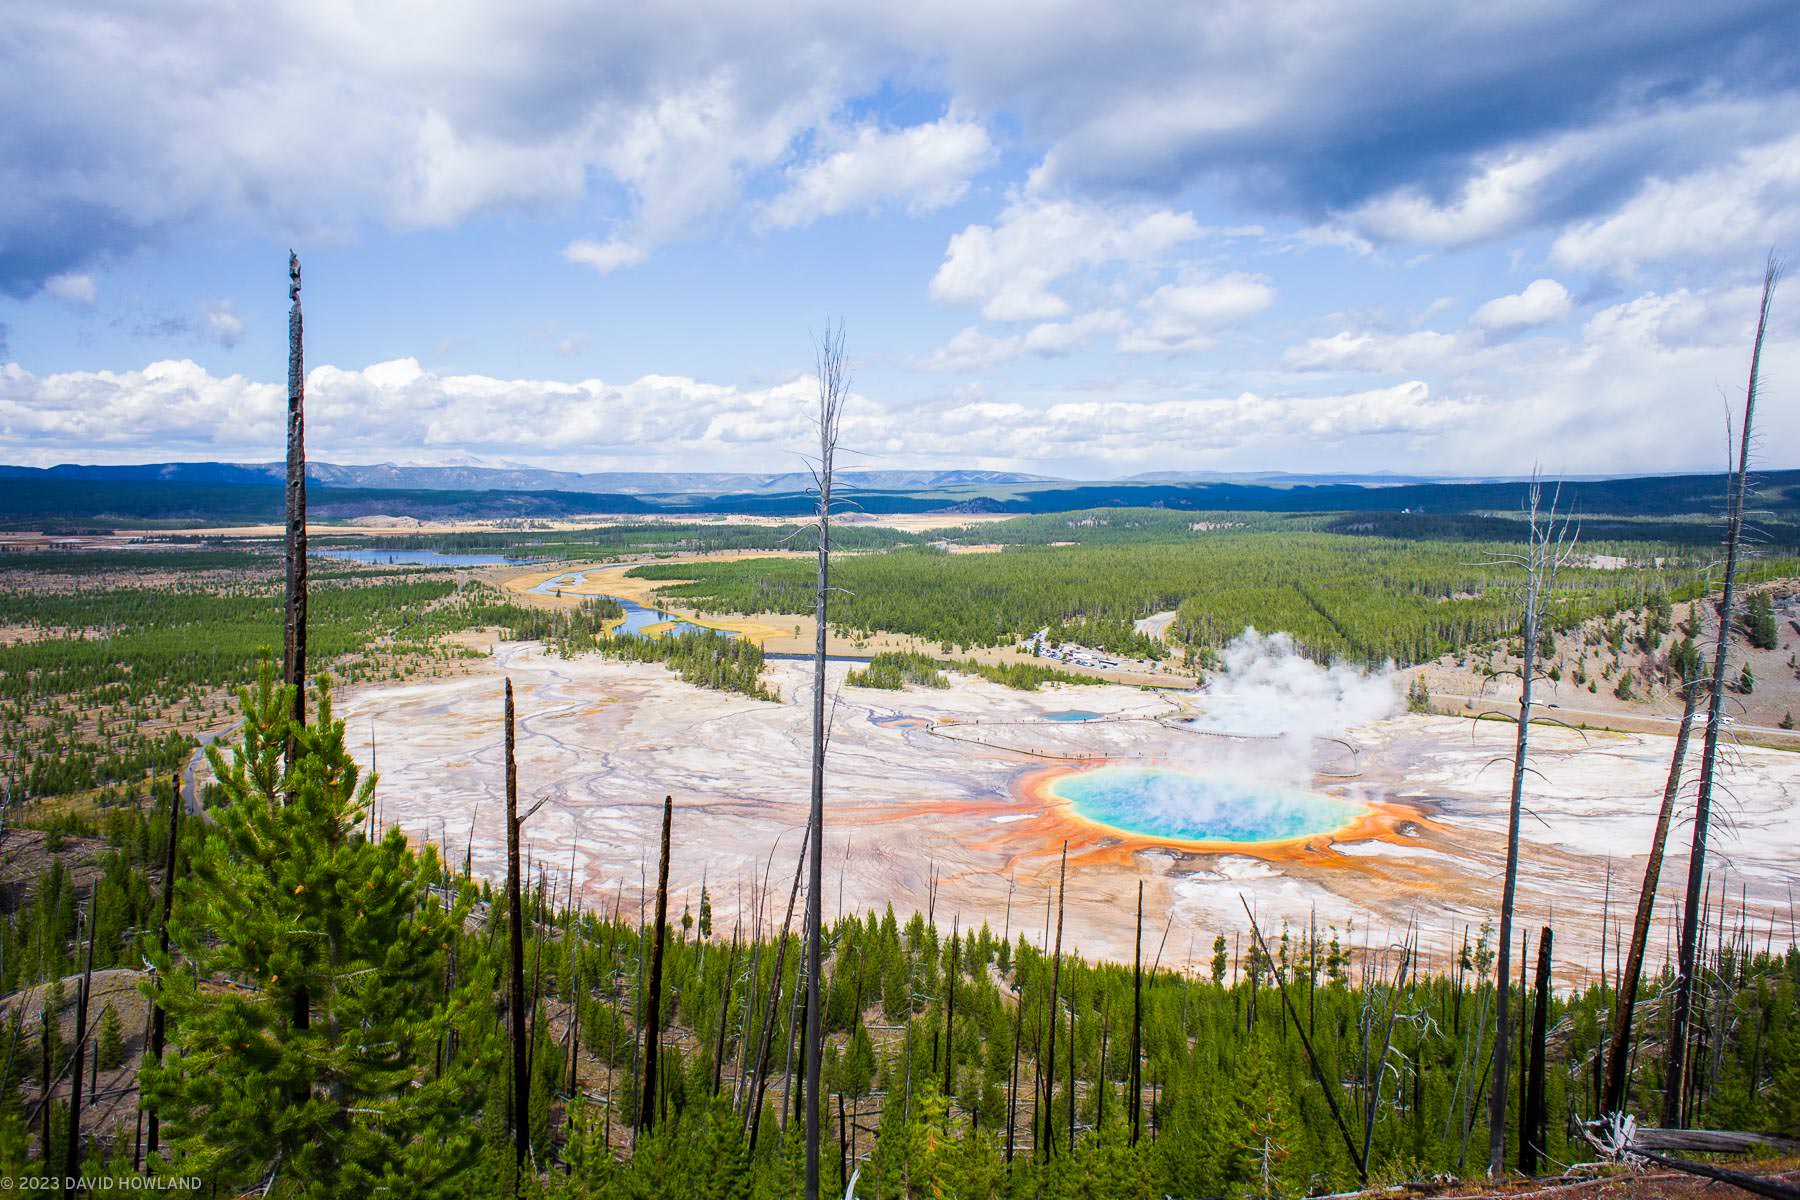 A photo of the colorful hot springs of Grand Prismatic Sping in Yellowstone National Park seen from above on a nearby ridgeline.